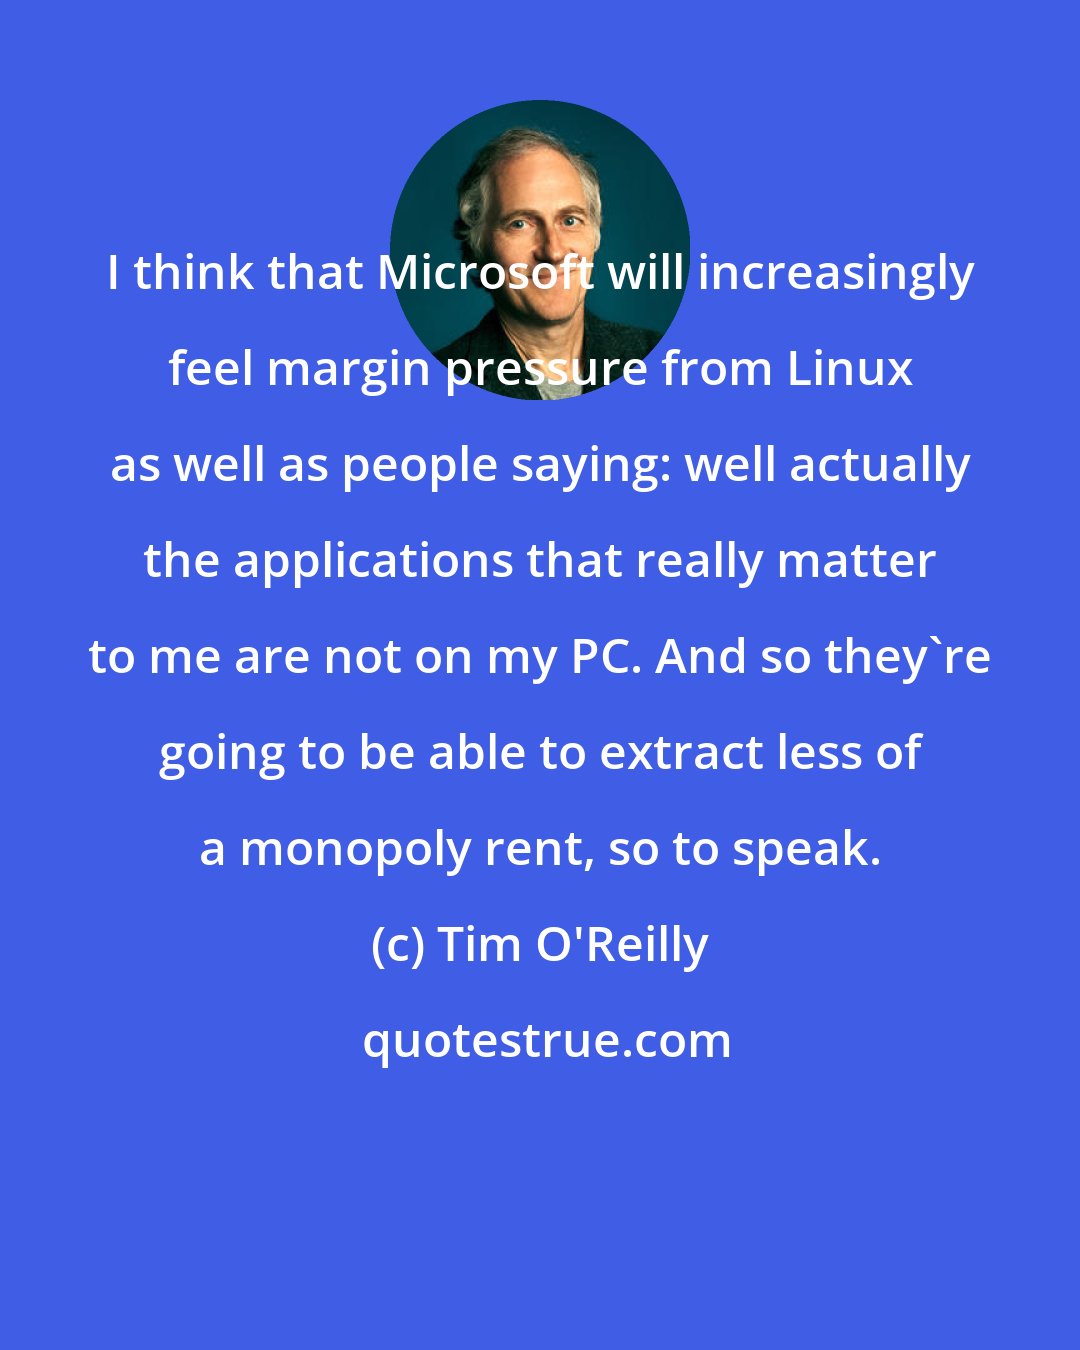 Tim O'Reilly: I think that Microsoft will increasingly feel margin pressure from Linux as well as people saying: well actually the applications that really matter to me are not on my PC. And so they're going to be able to extract less of a monopoly rent, so to speak.